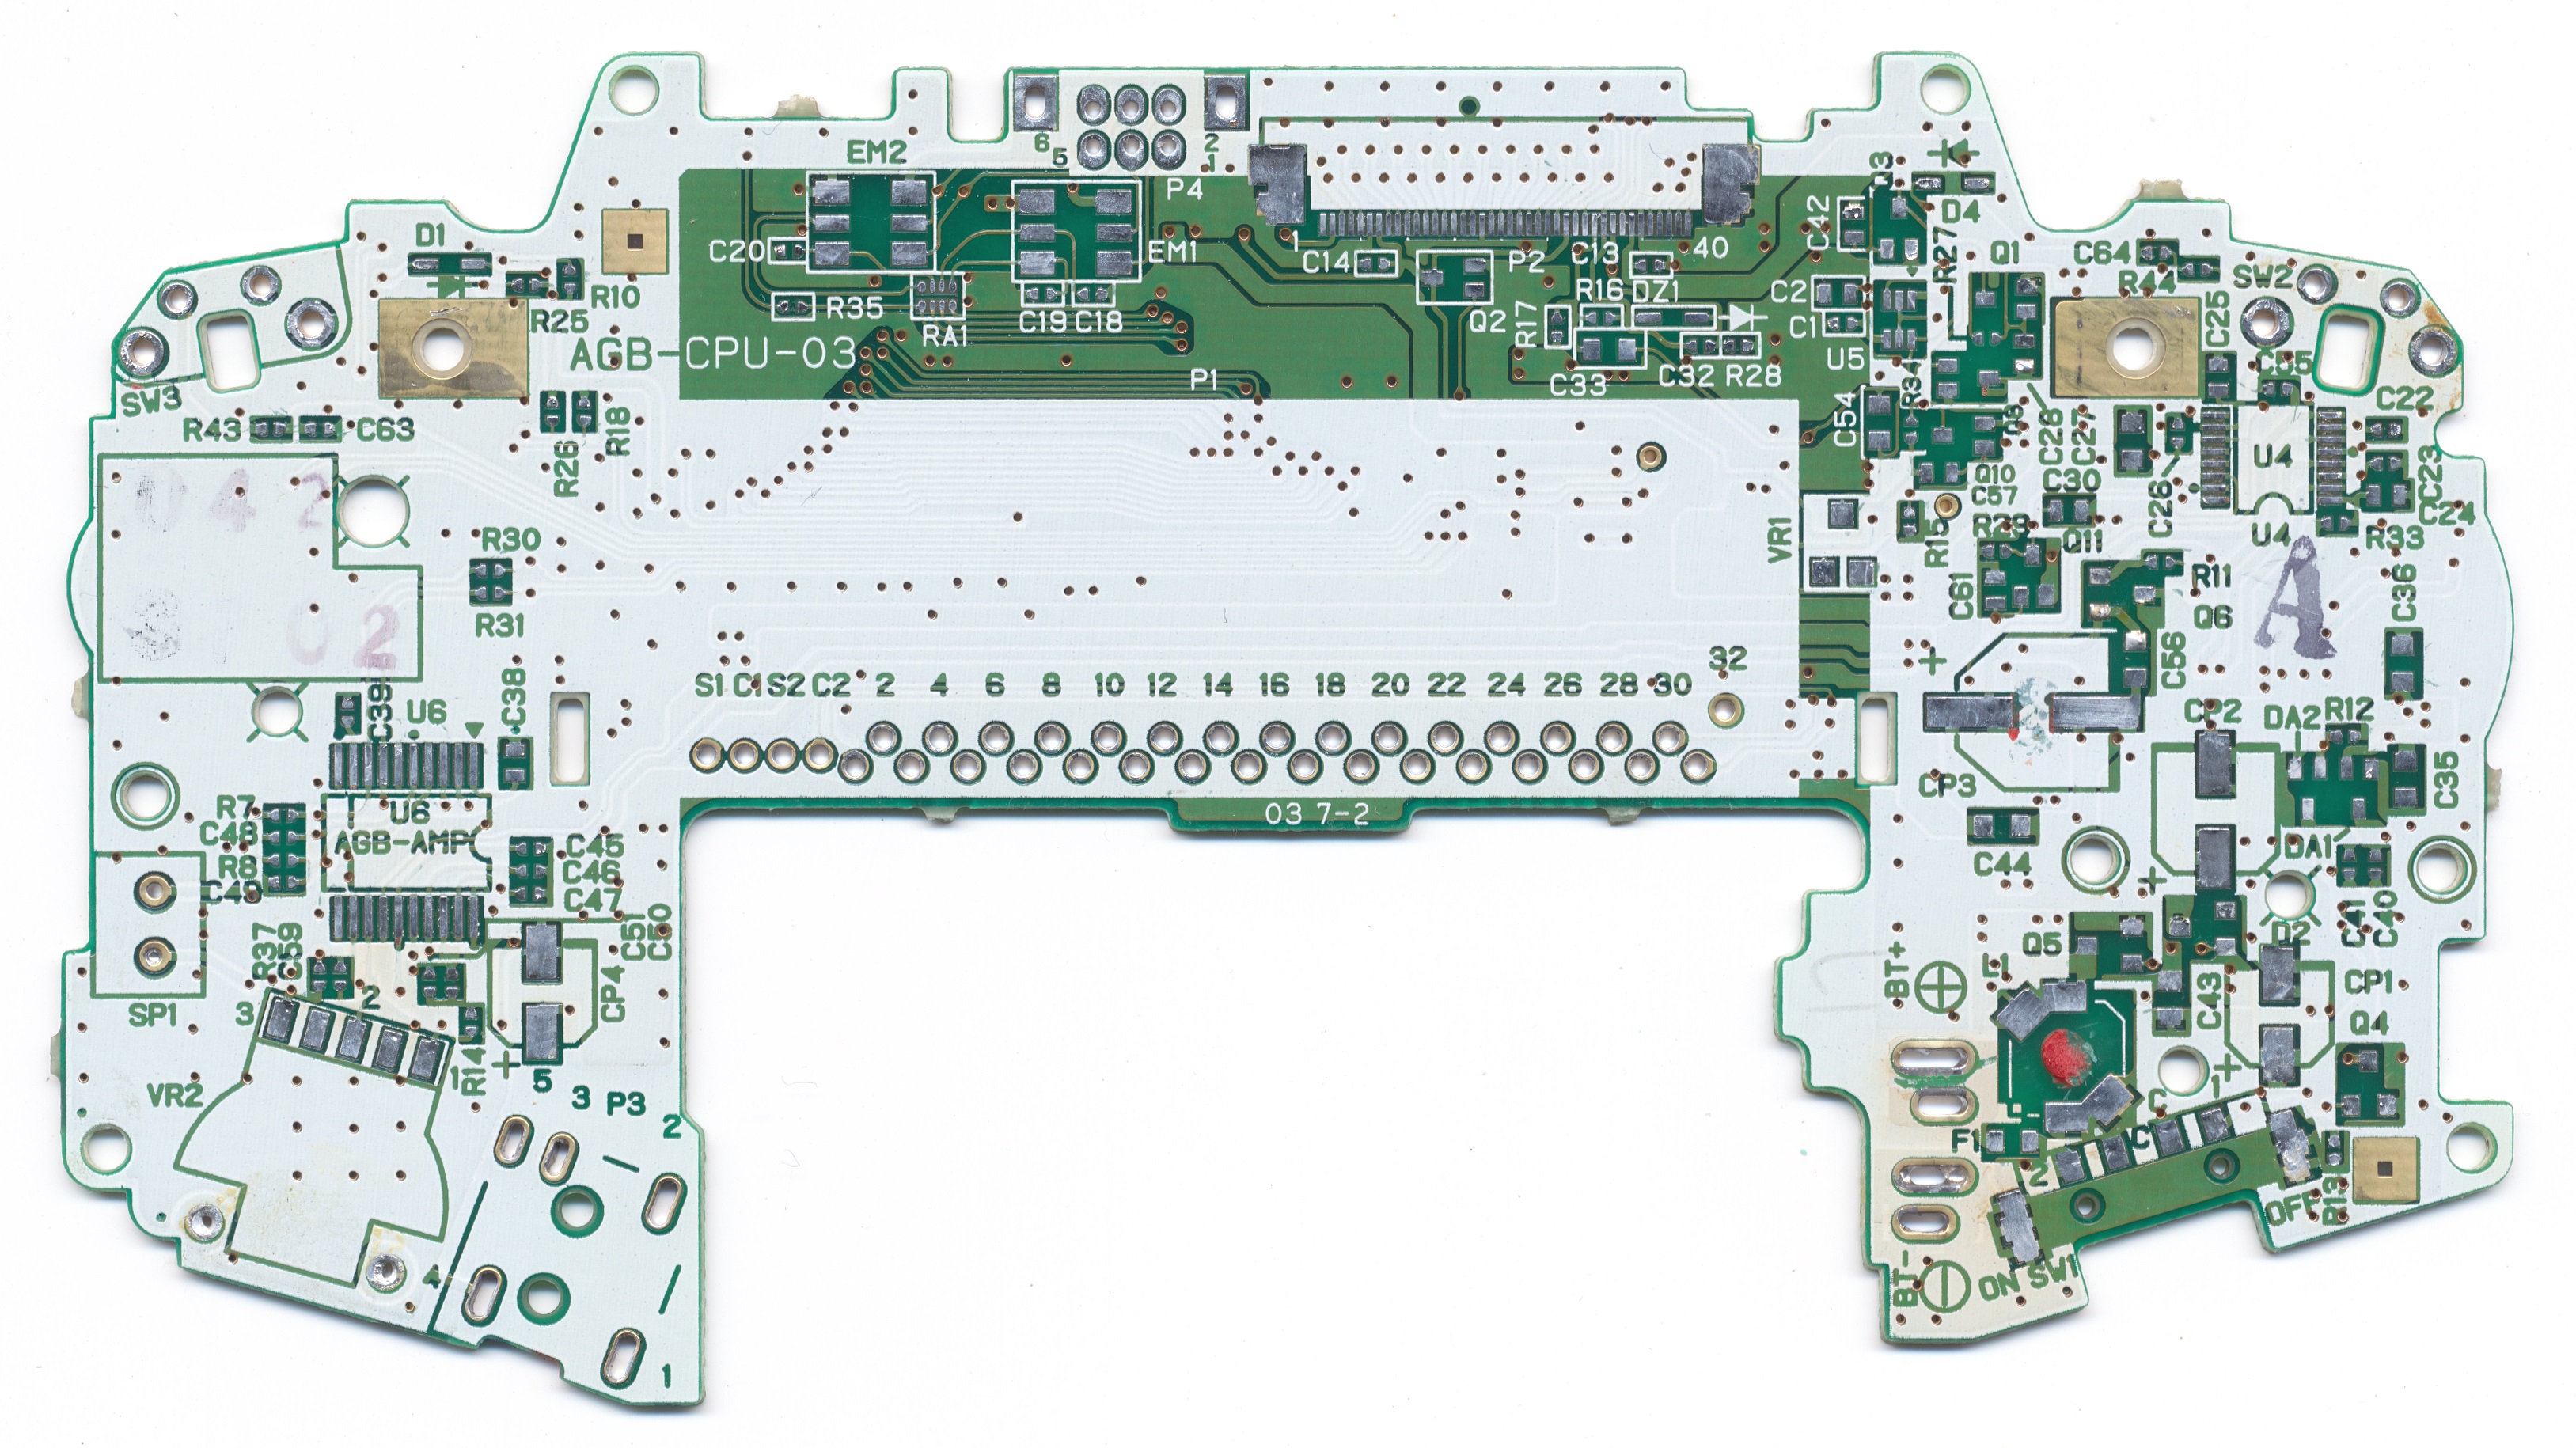 GAME_BOY_ADVANCE_AGB-CPU-03_BOTTOM_WITHOUT_PARTS_PCB_SCAN_ATV.jpg